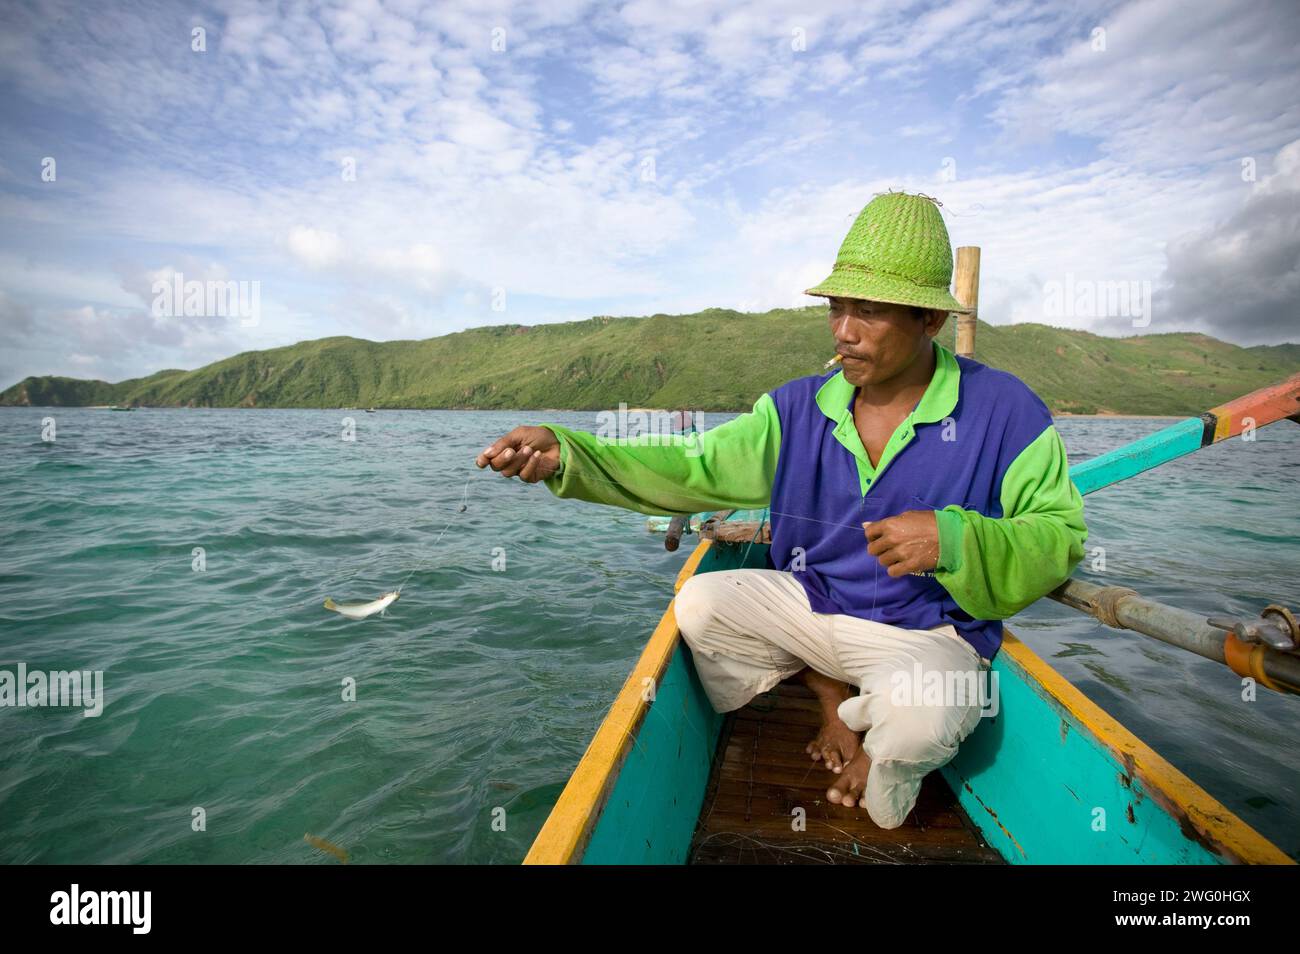 A fisherman catches a small fish in Kuta, Lombok, Indonesia. Stock Photo